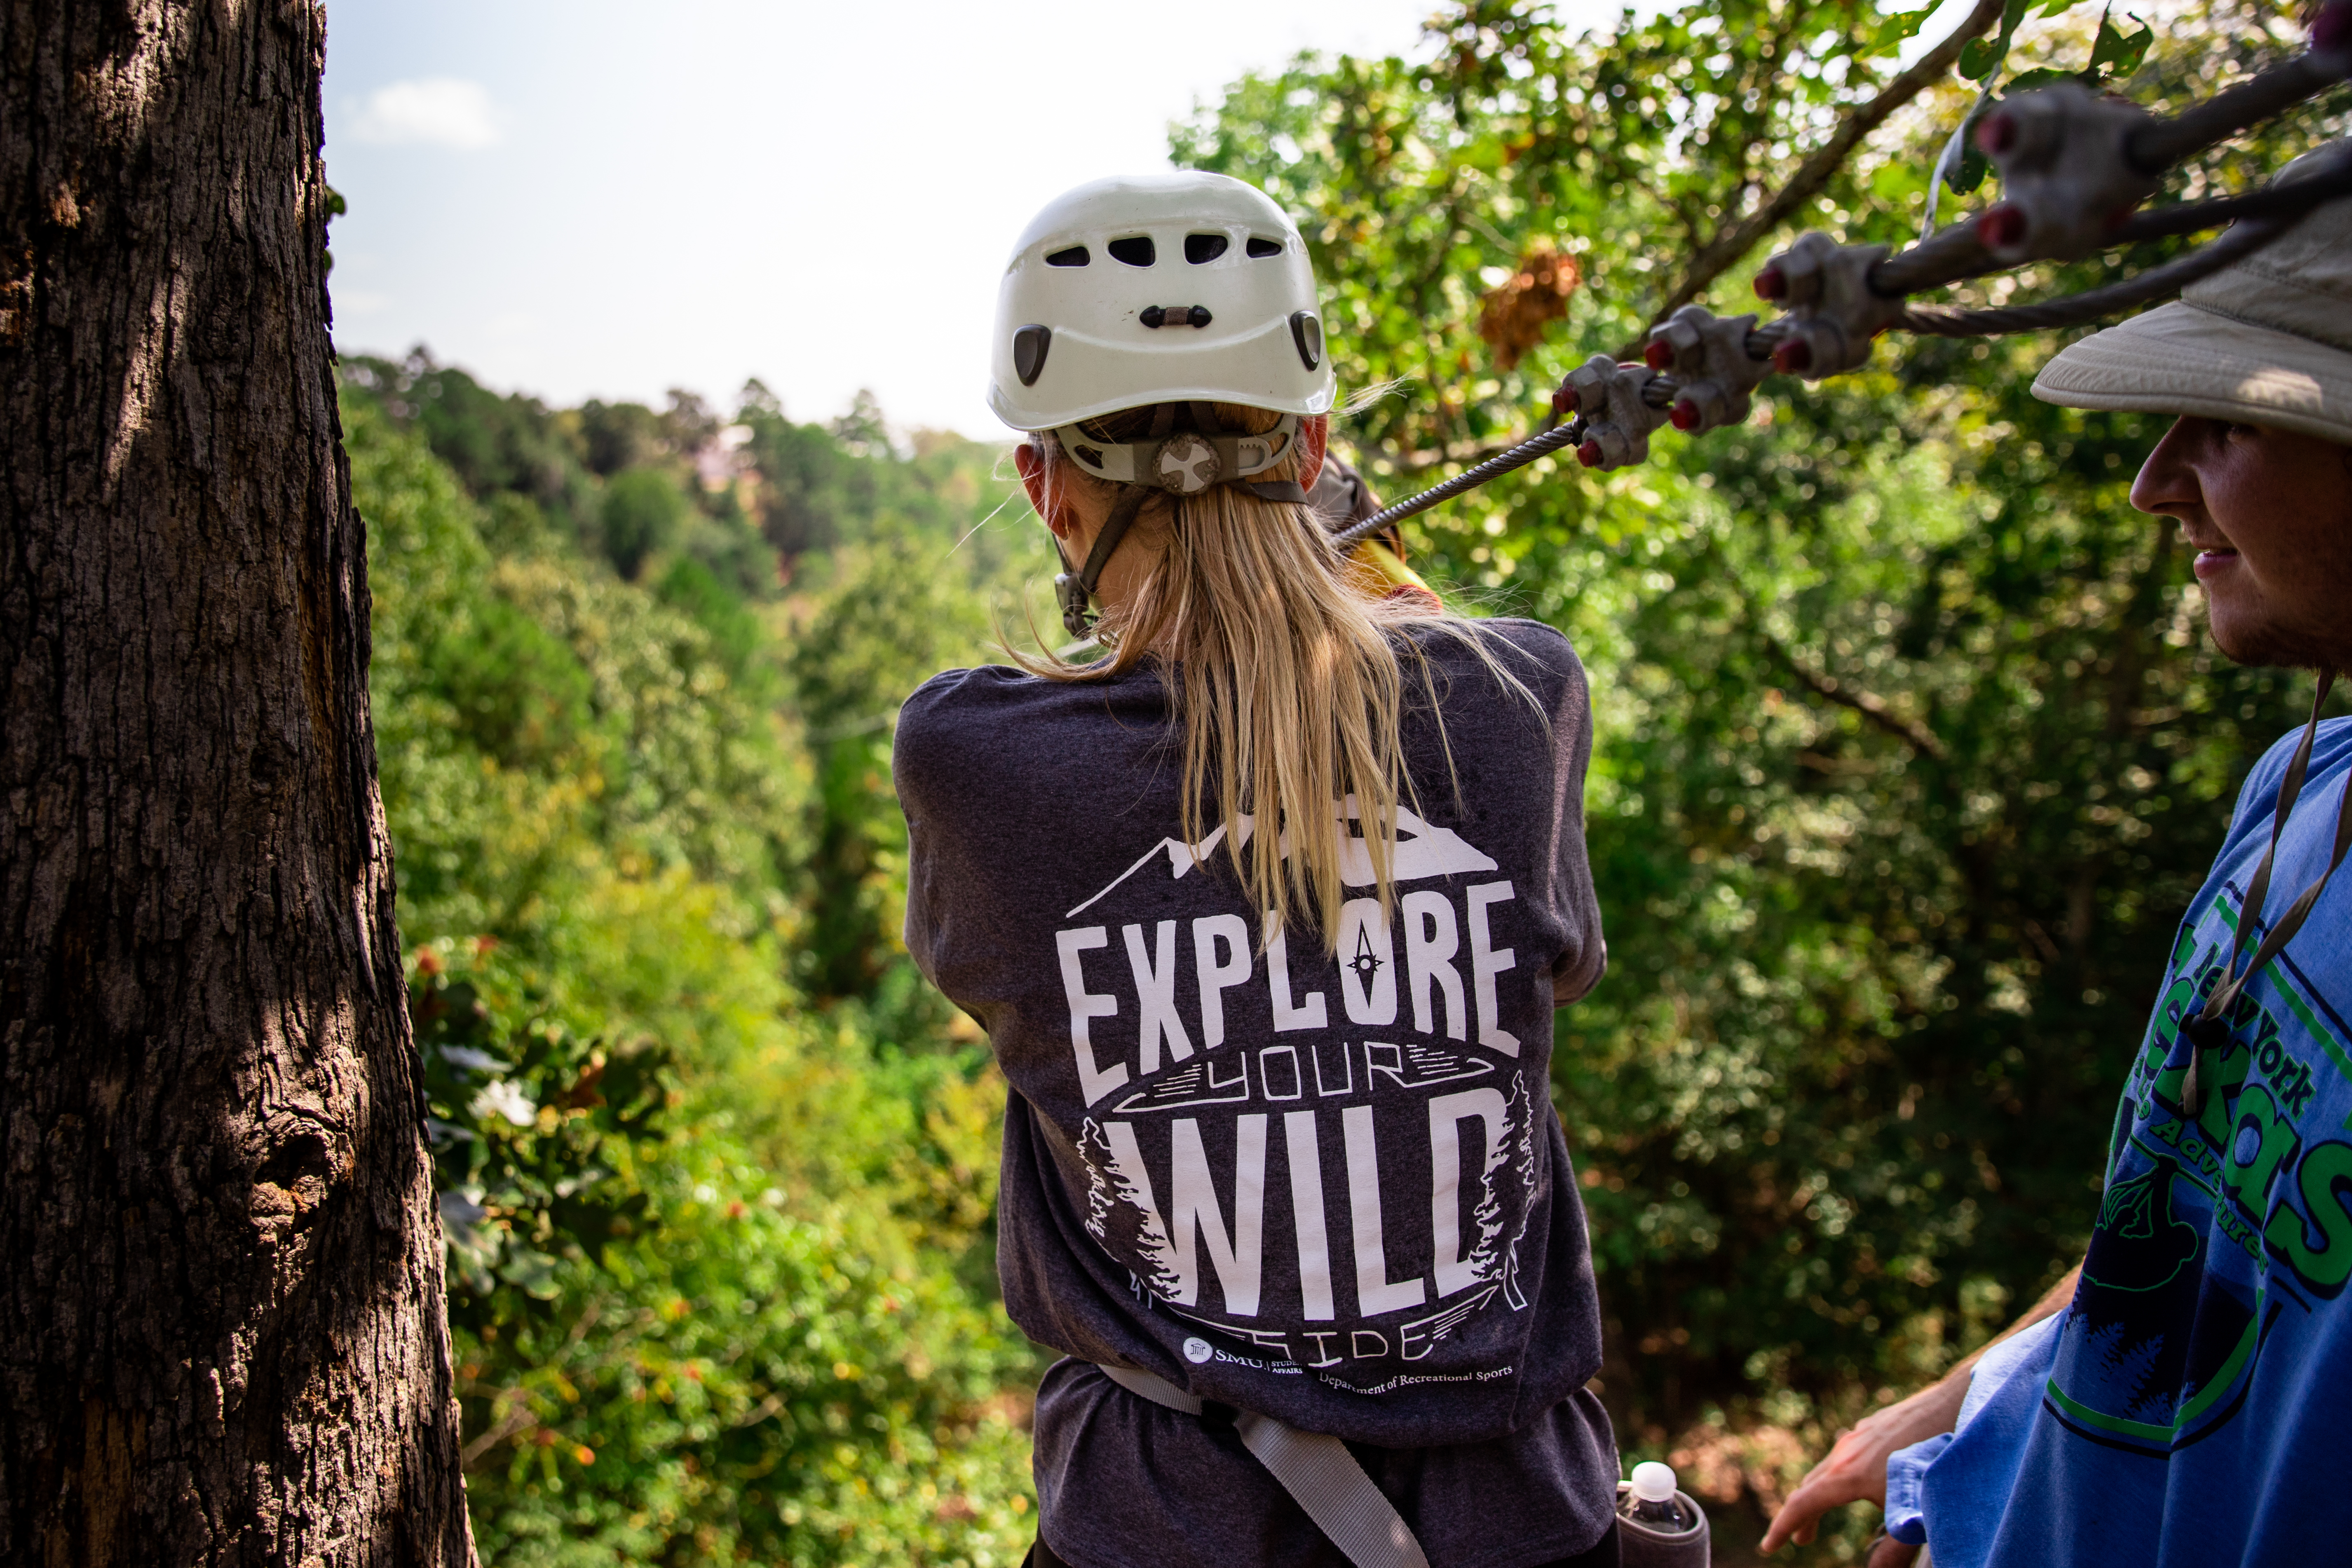 An image of a person preparing to zipline down the side of a mountain.